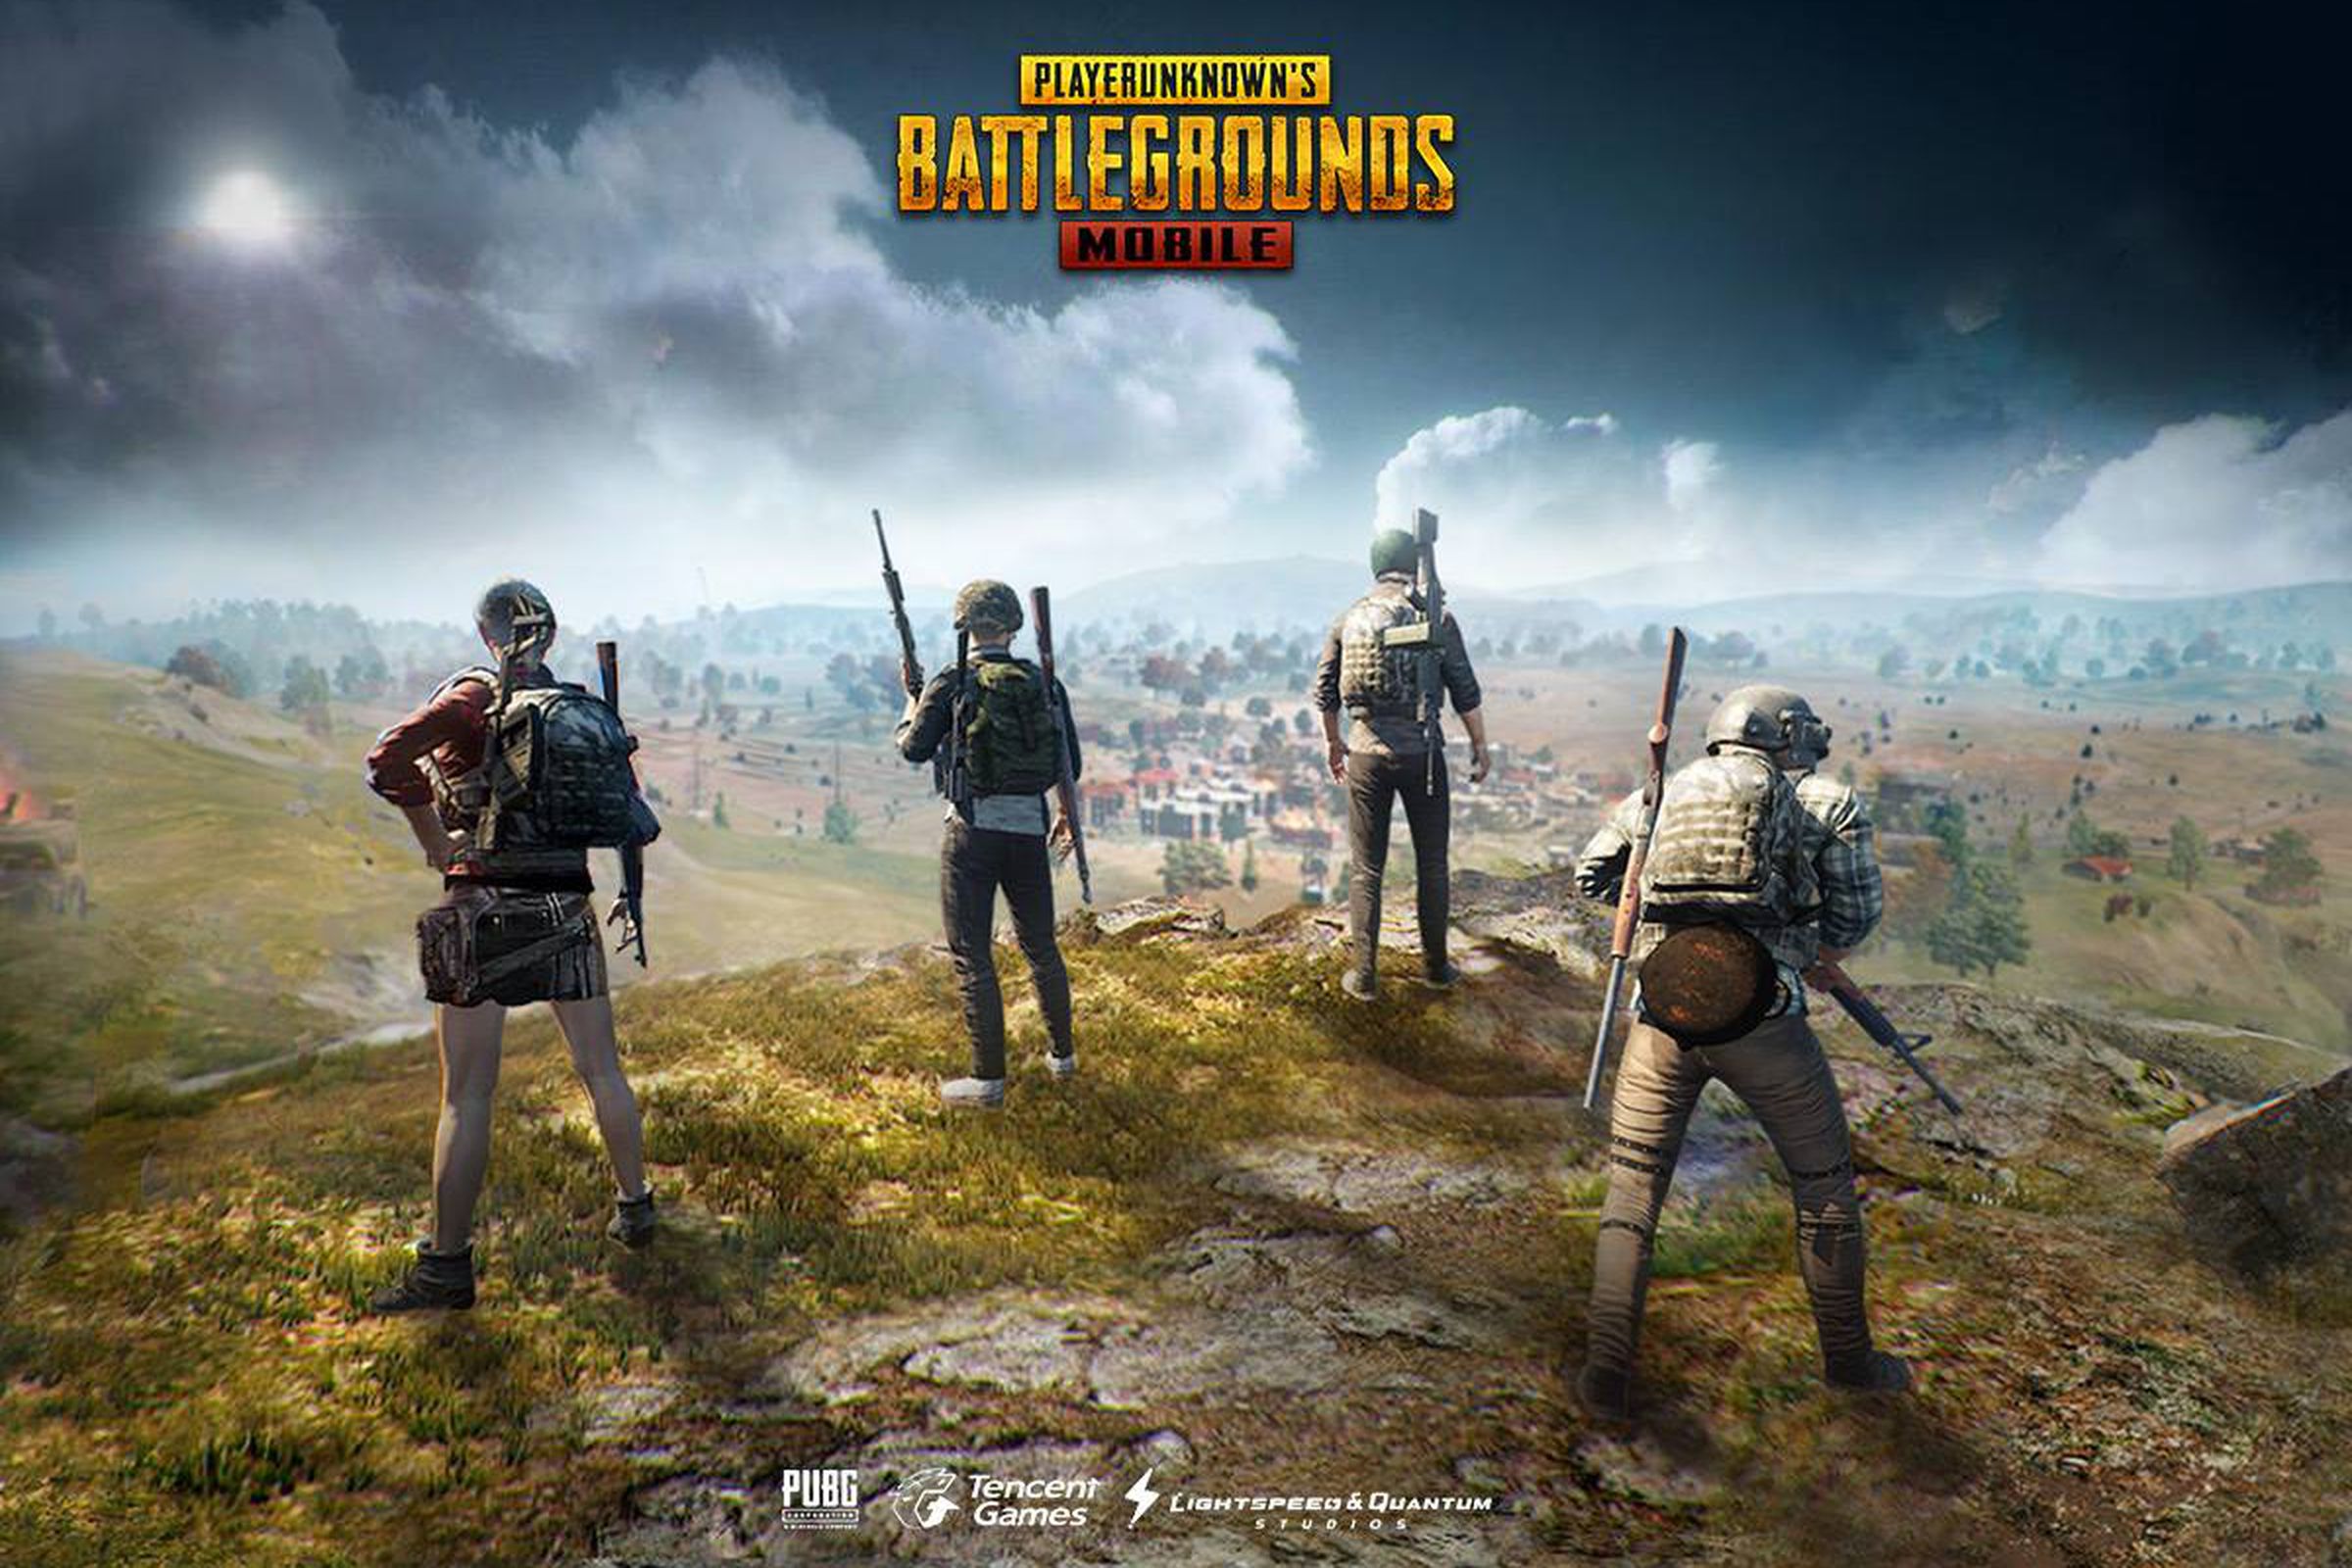 PUBG Mobile is currently one of Tencent’s biggest titles.